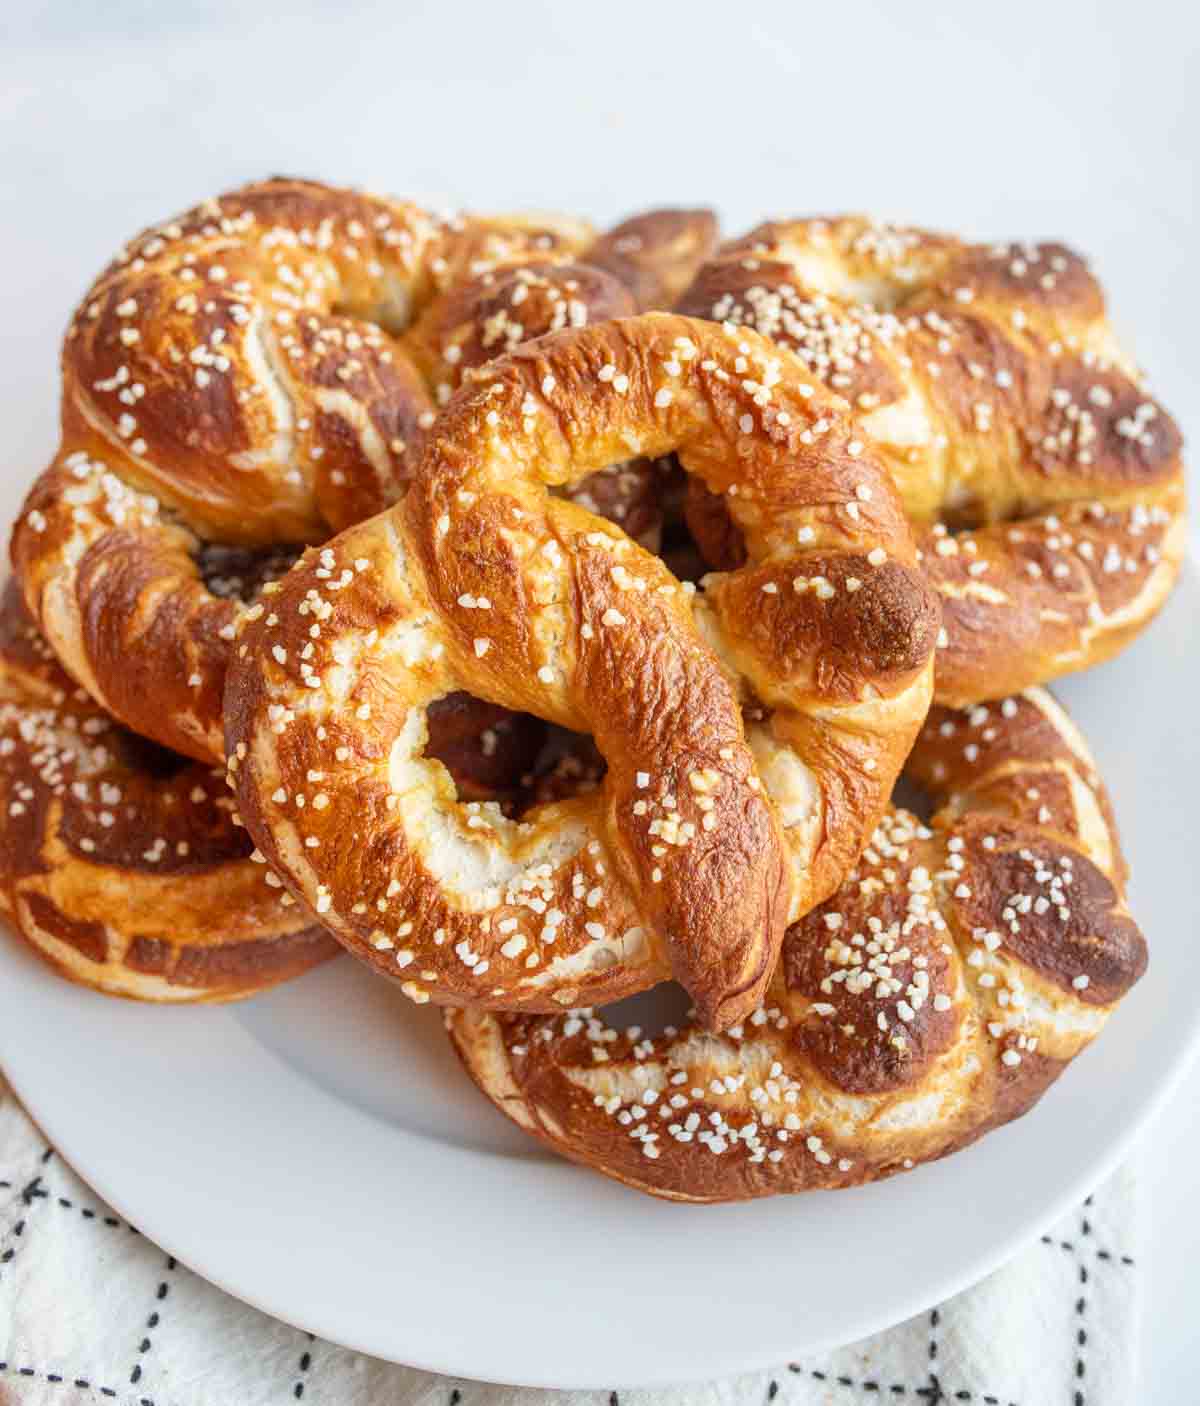 Stack of homemade pretzels on a plate.